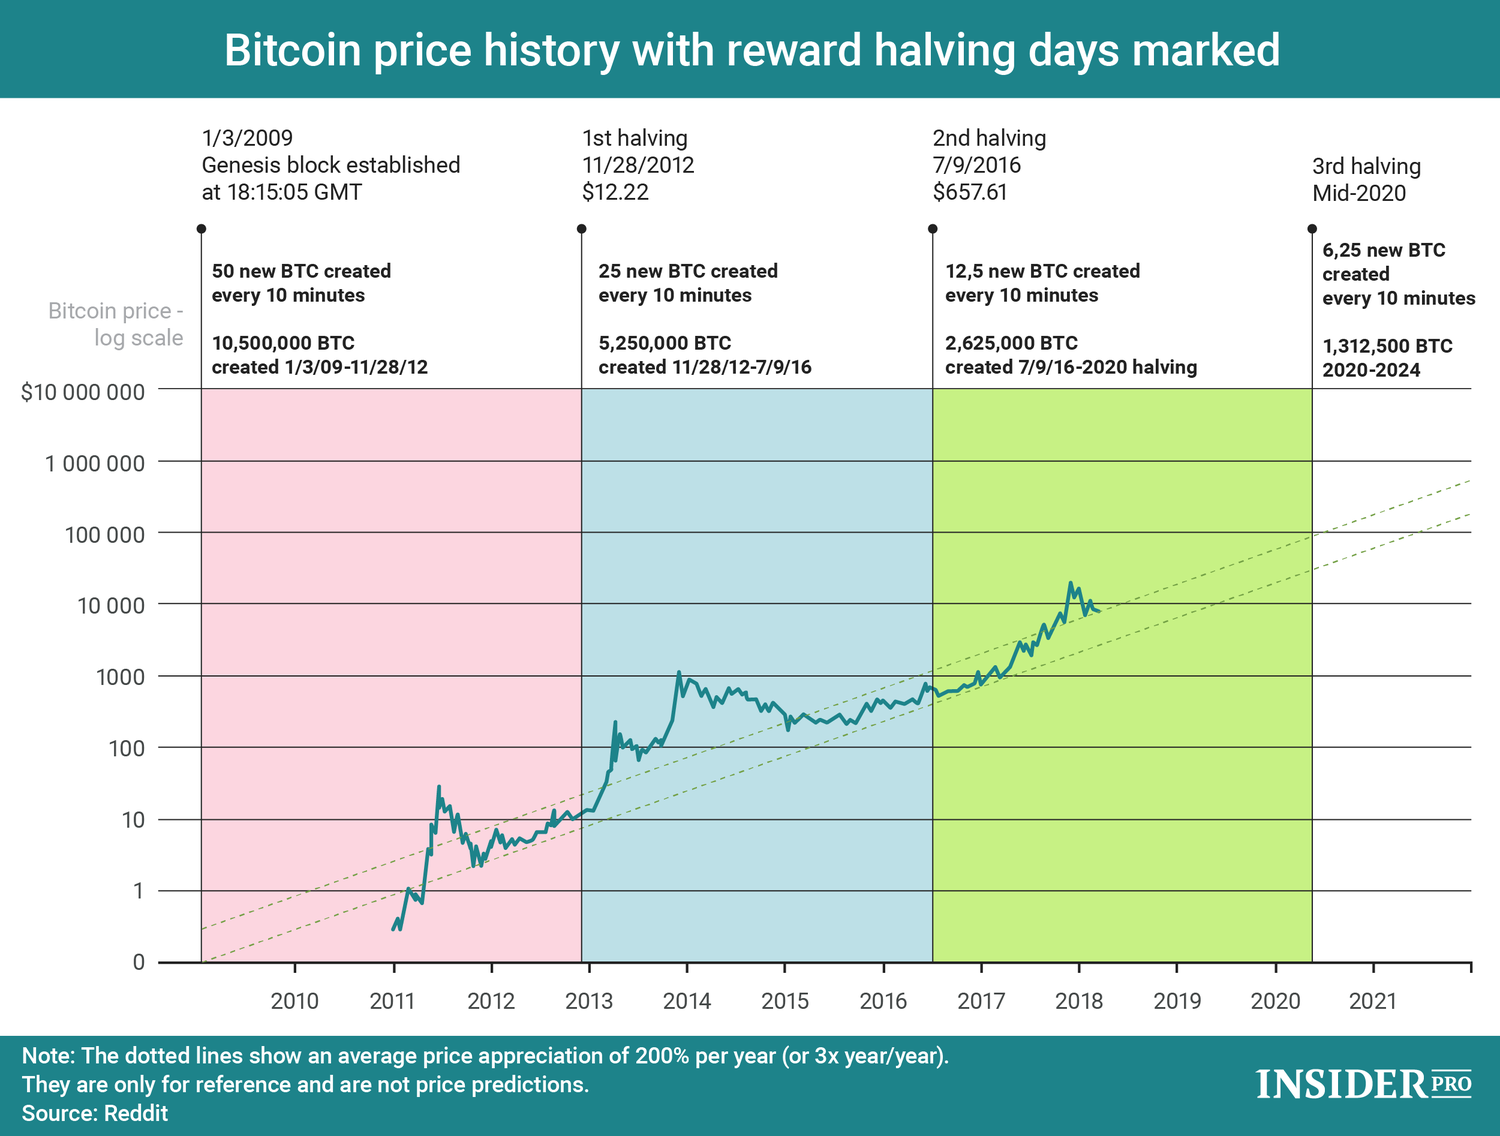 With 1 day to go to Halving Bitcoin, many expect history to repeat itself. Source: Insider